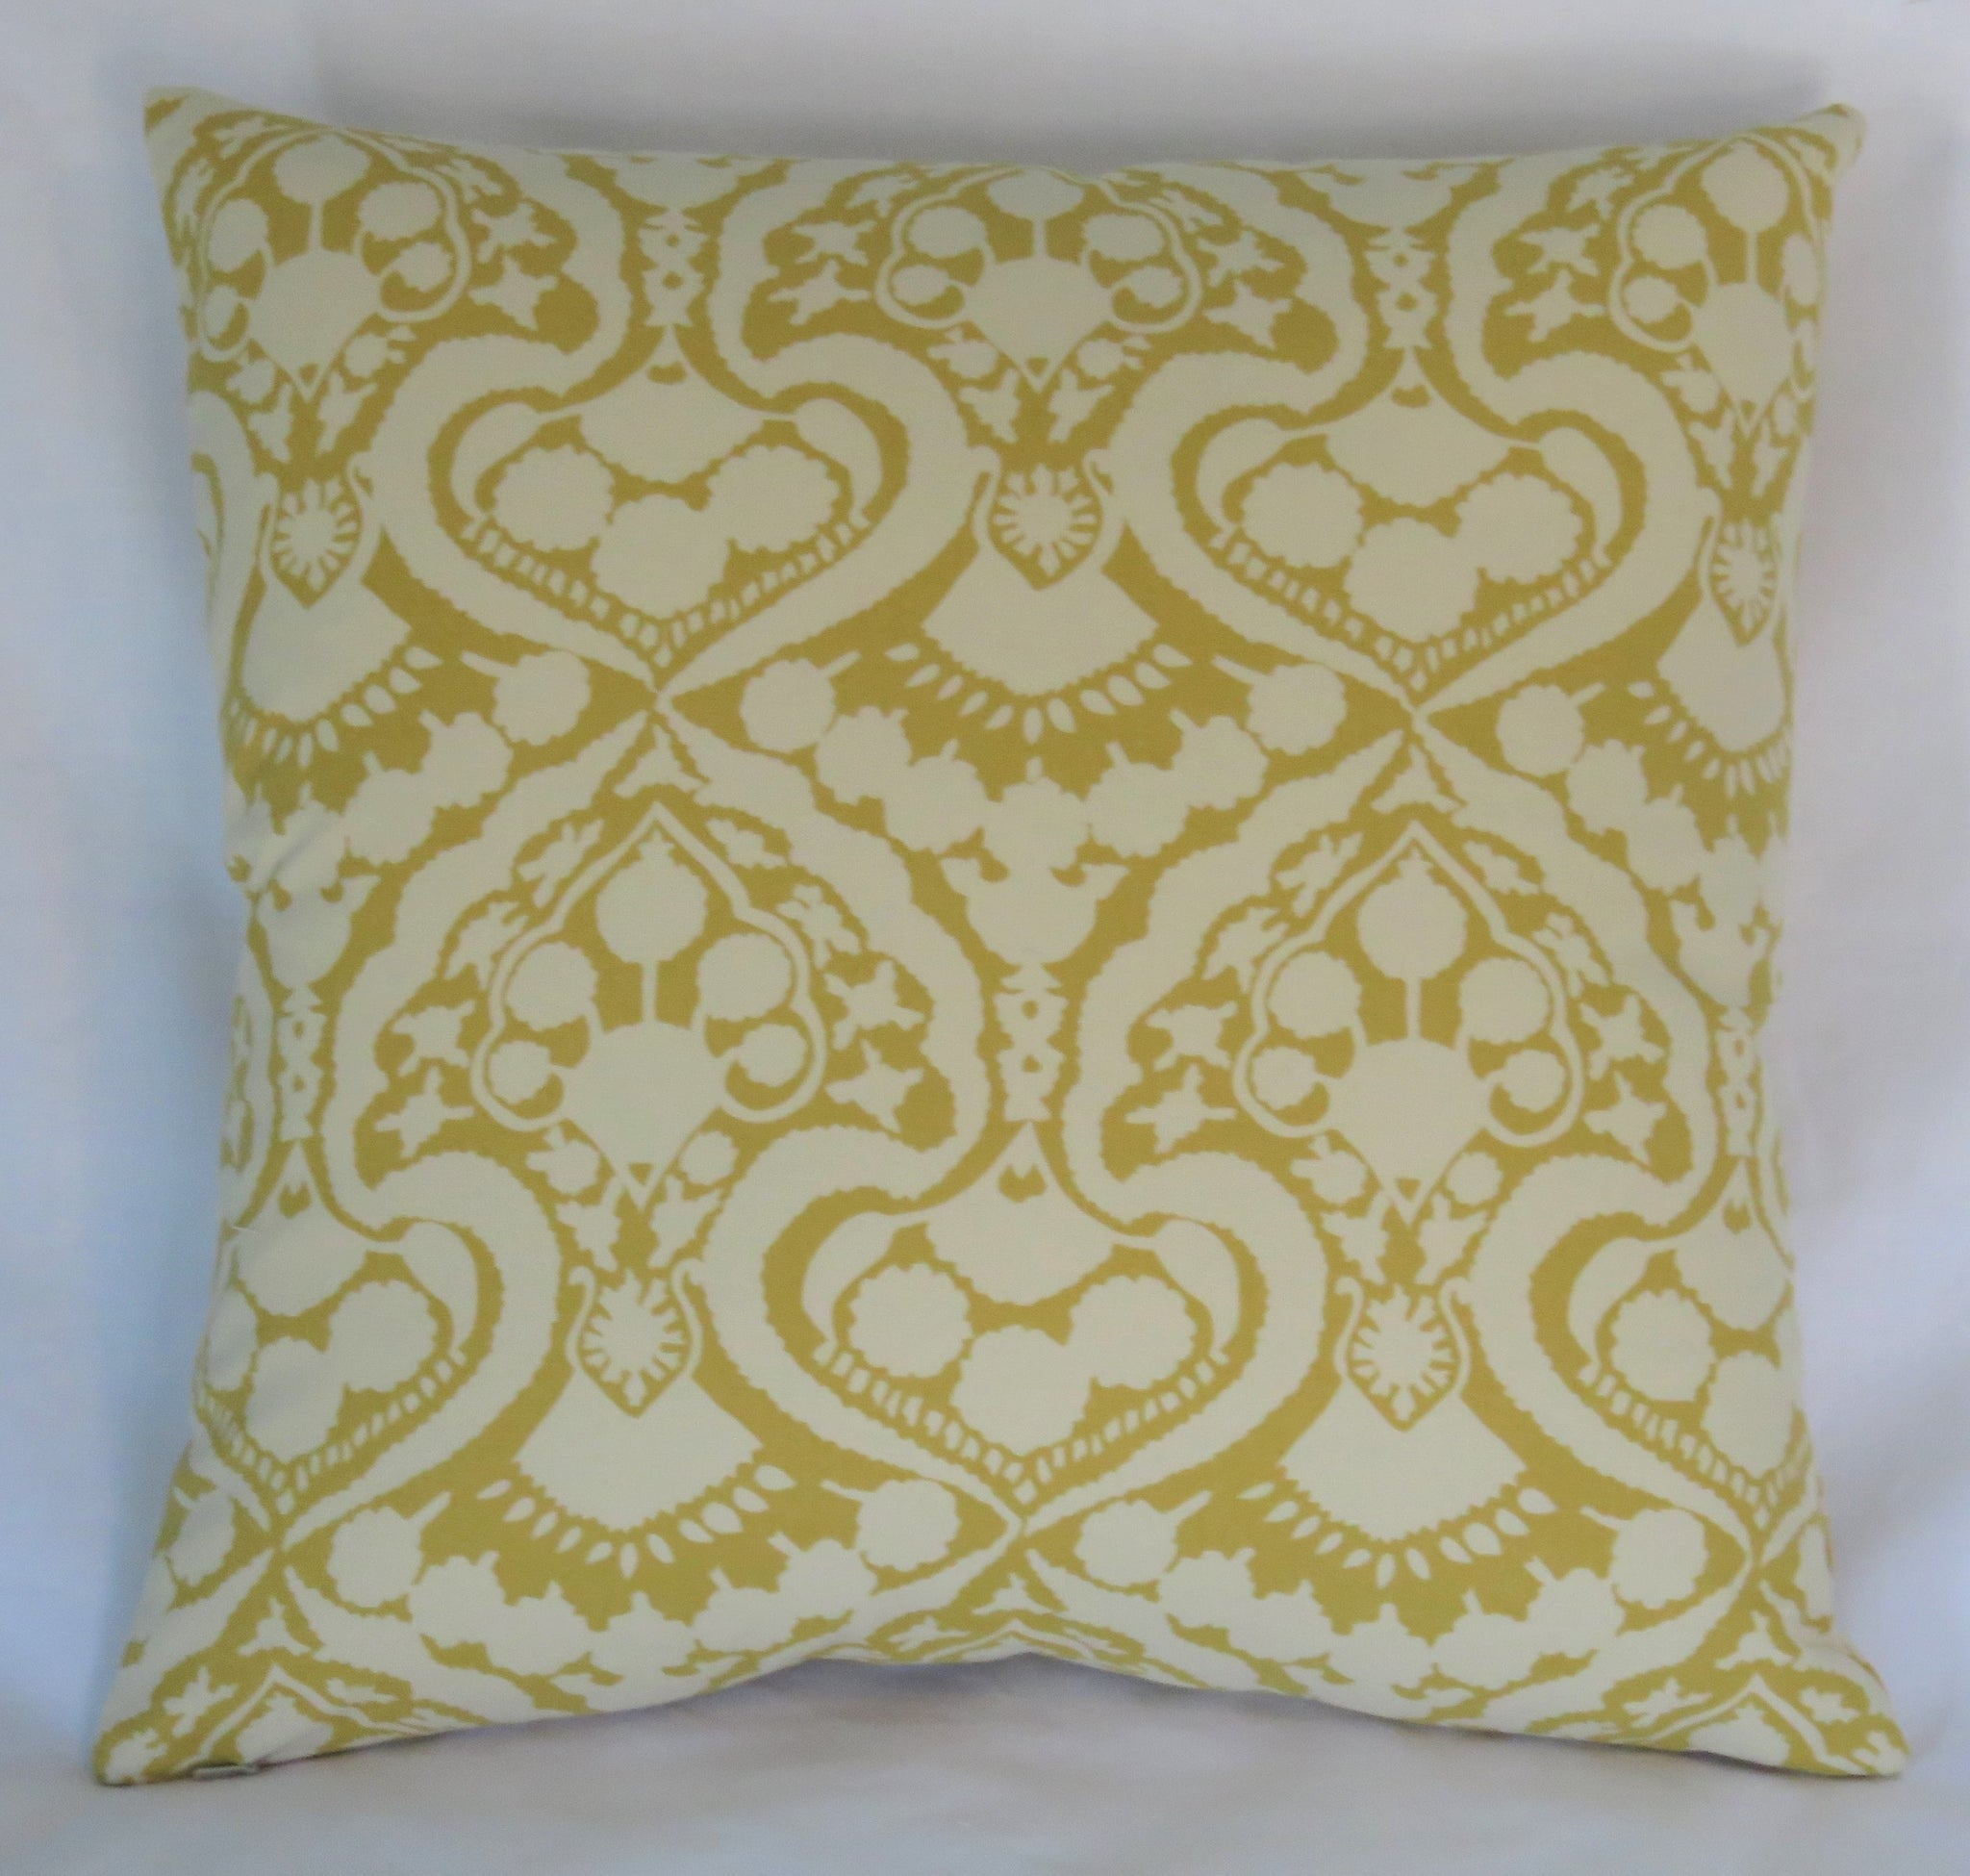 Gold and Ivory damask print pillow cover